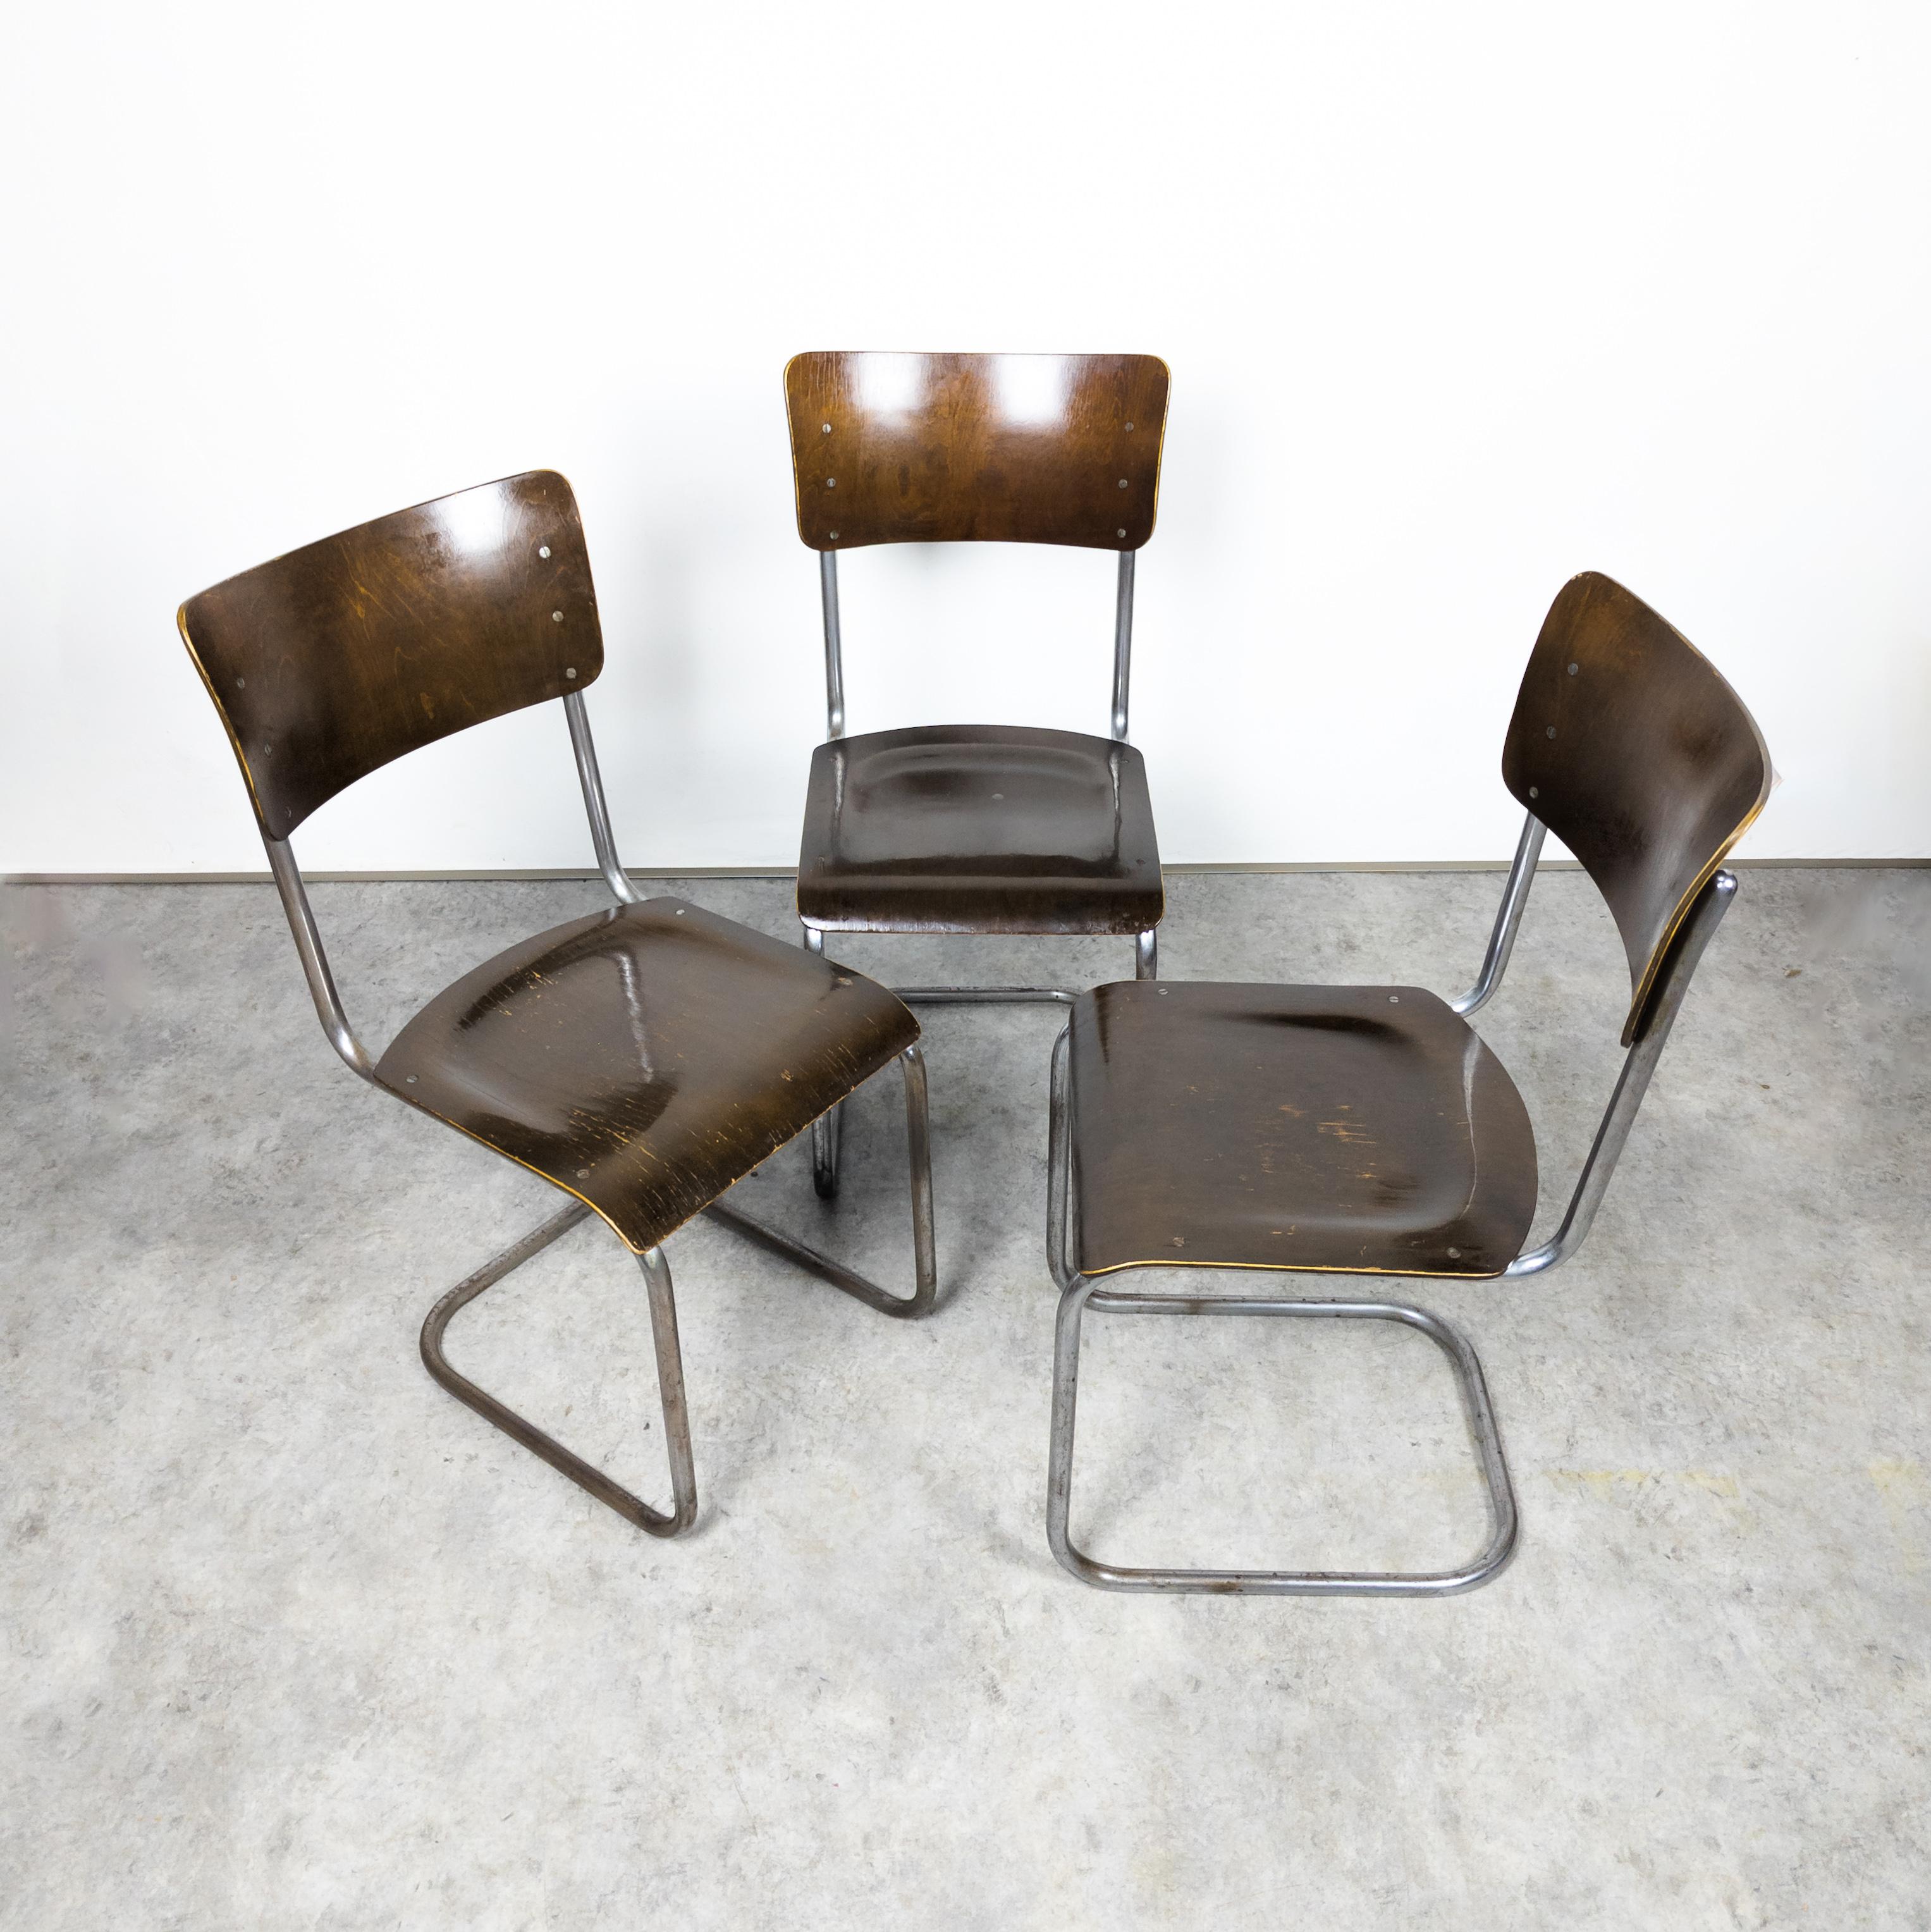 Early S 43 cantilever chairs by Mart Stam, 1930s For Sale 3